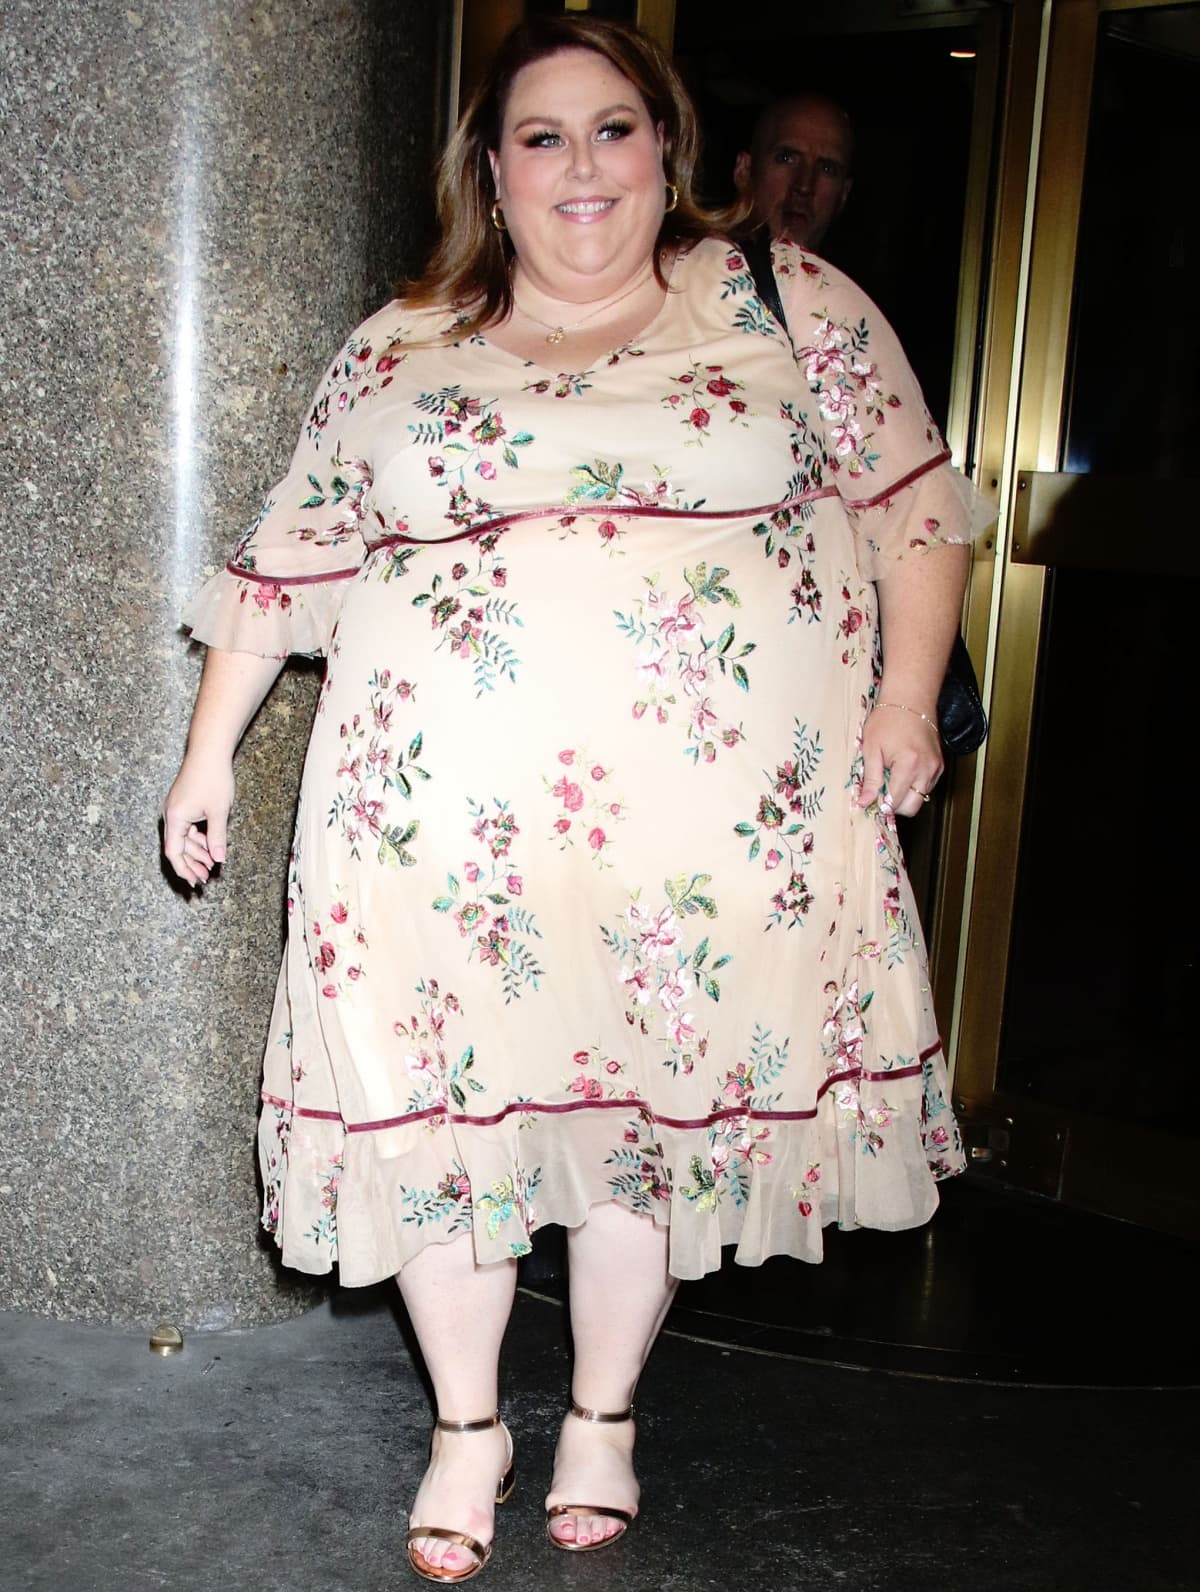 Chrissy Metz in a floral dress and ankle-strap heels on the set of New York Live